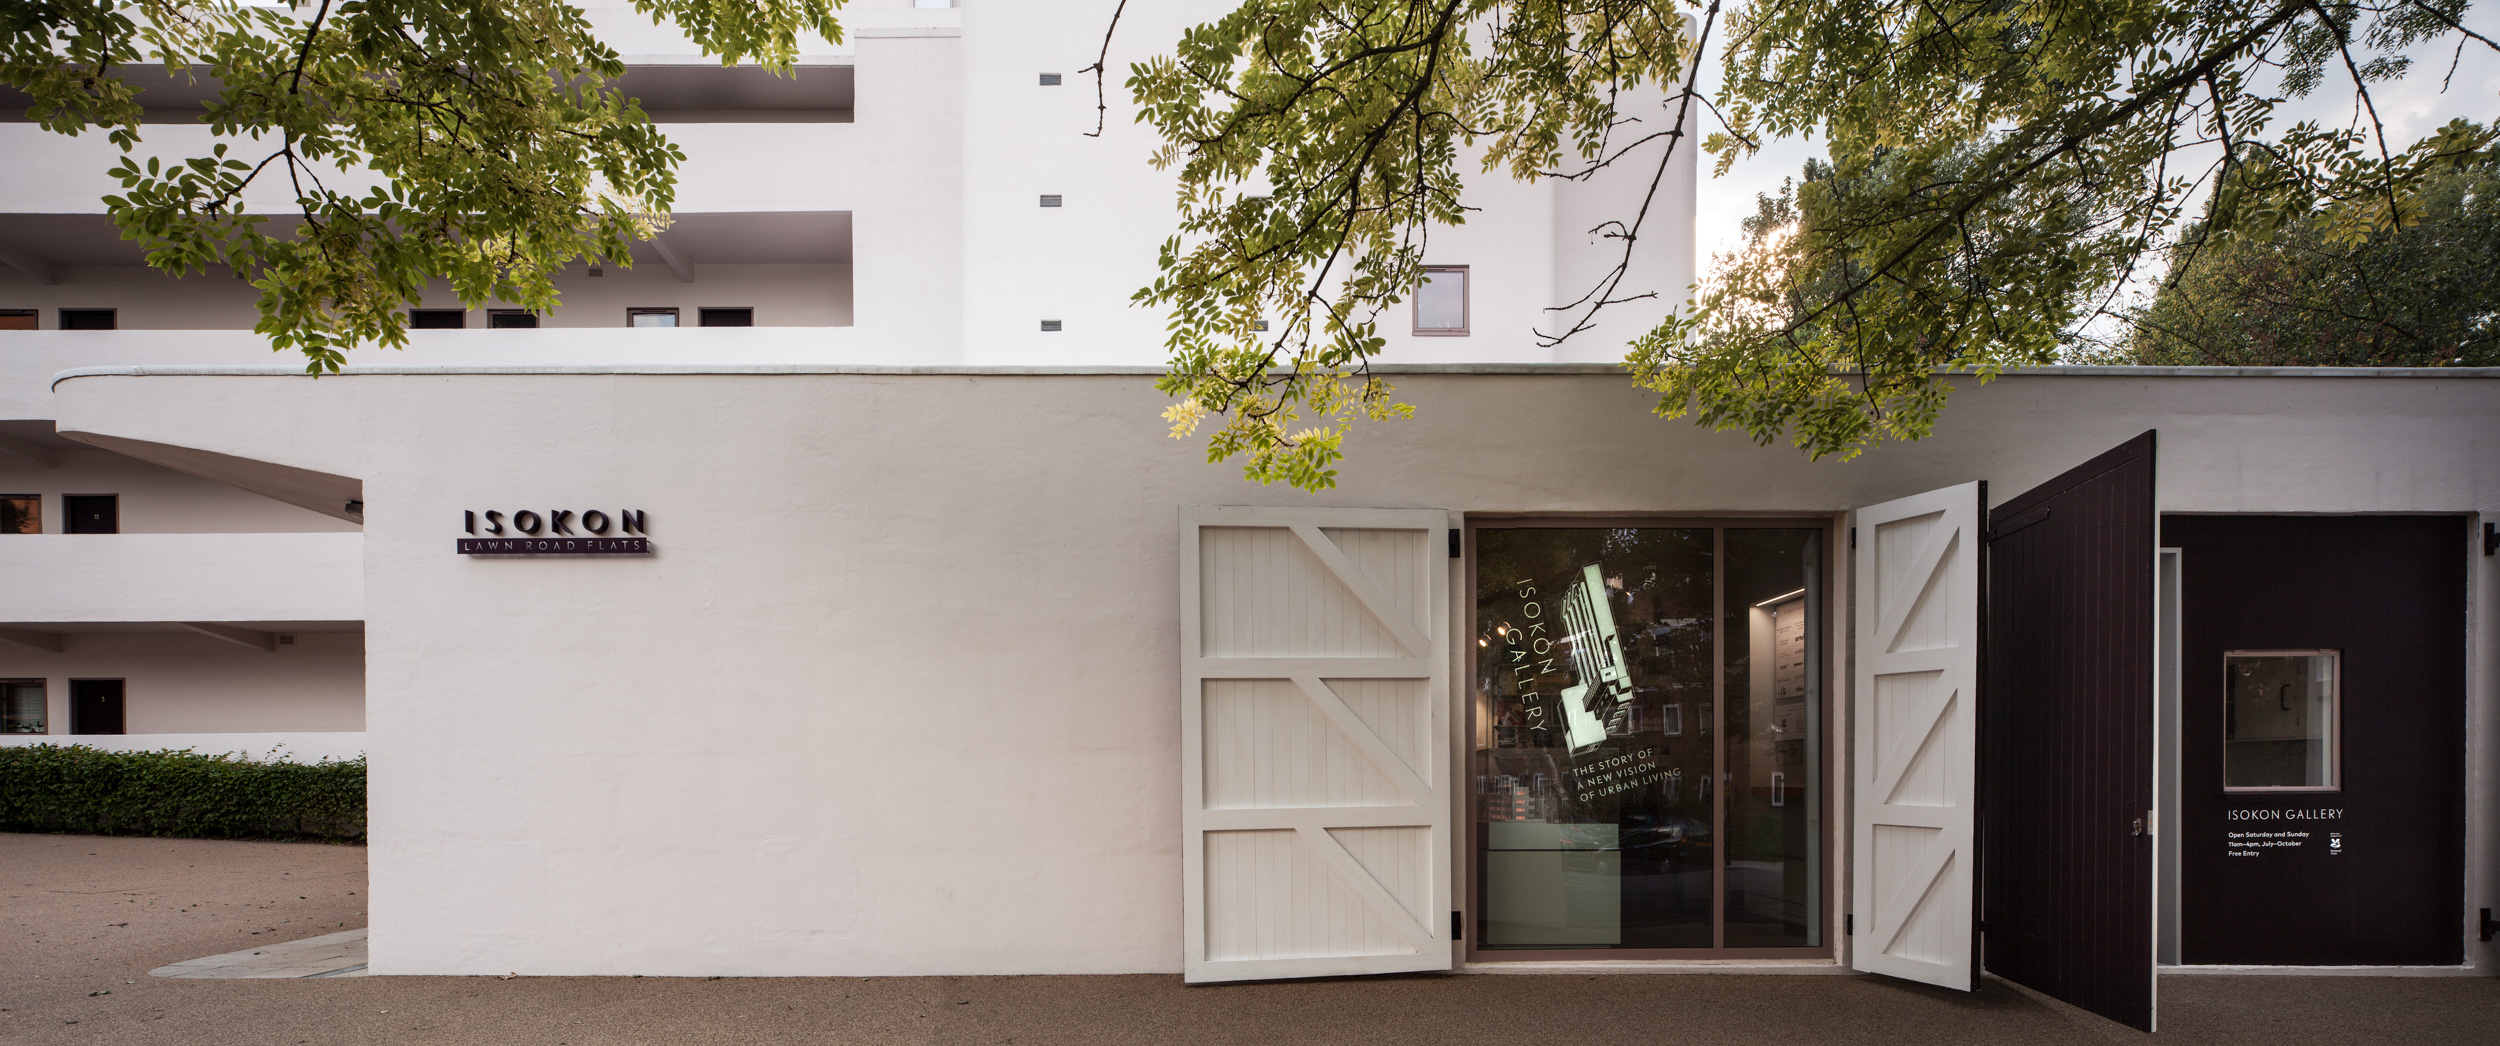 Isokon Building and Gallery 